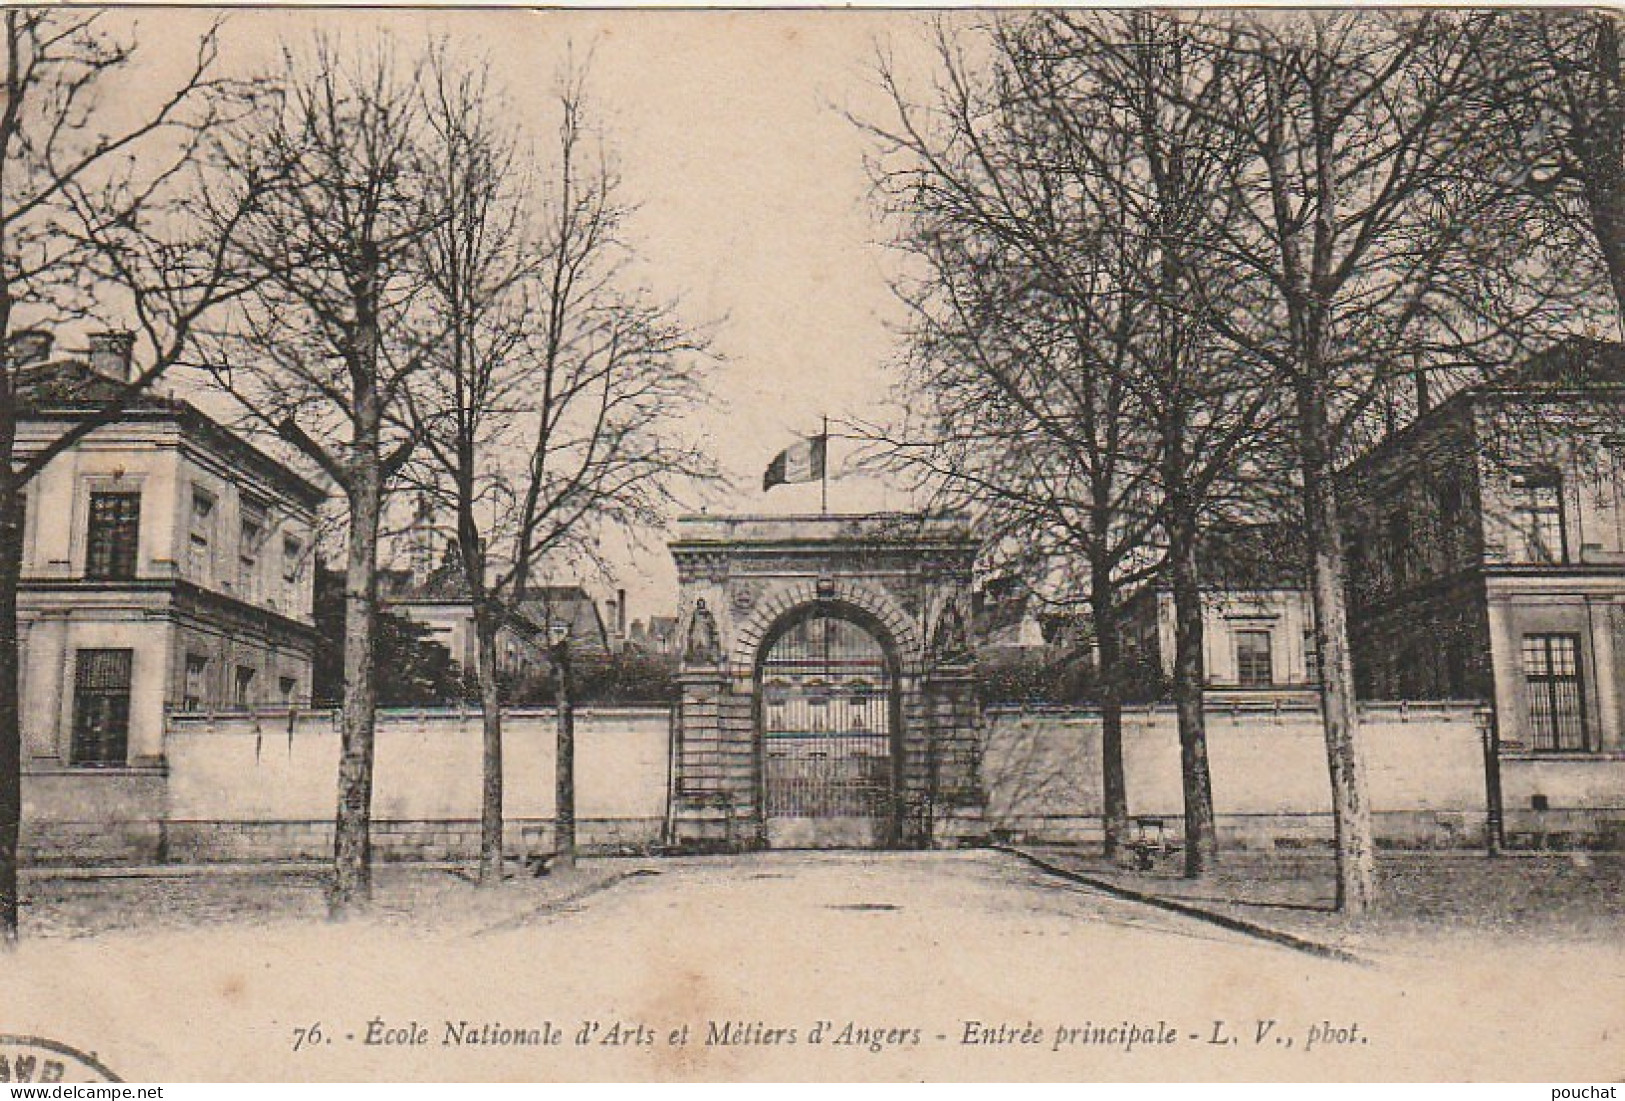 AA+ 64-(49) ANGERS - ECOLE NATIONALE D'ARTS ET METIERS D'ANGERS - ENTREE PRINCIPALE - Angers